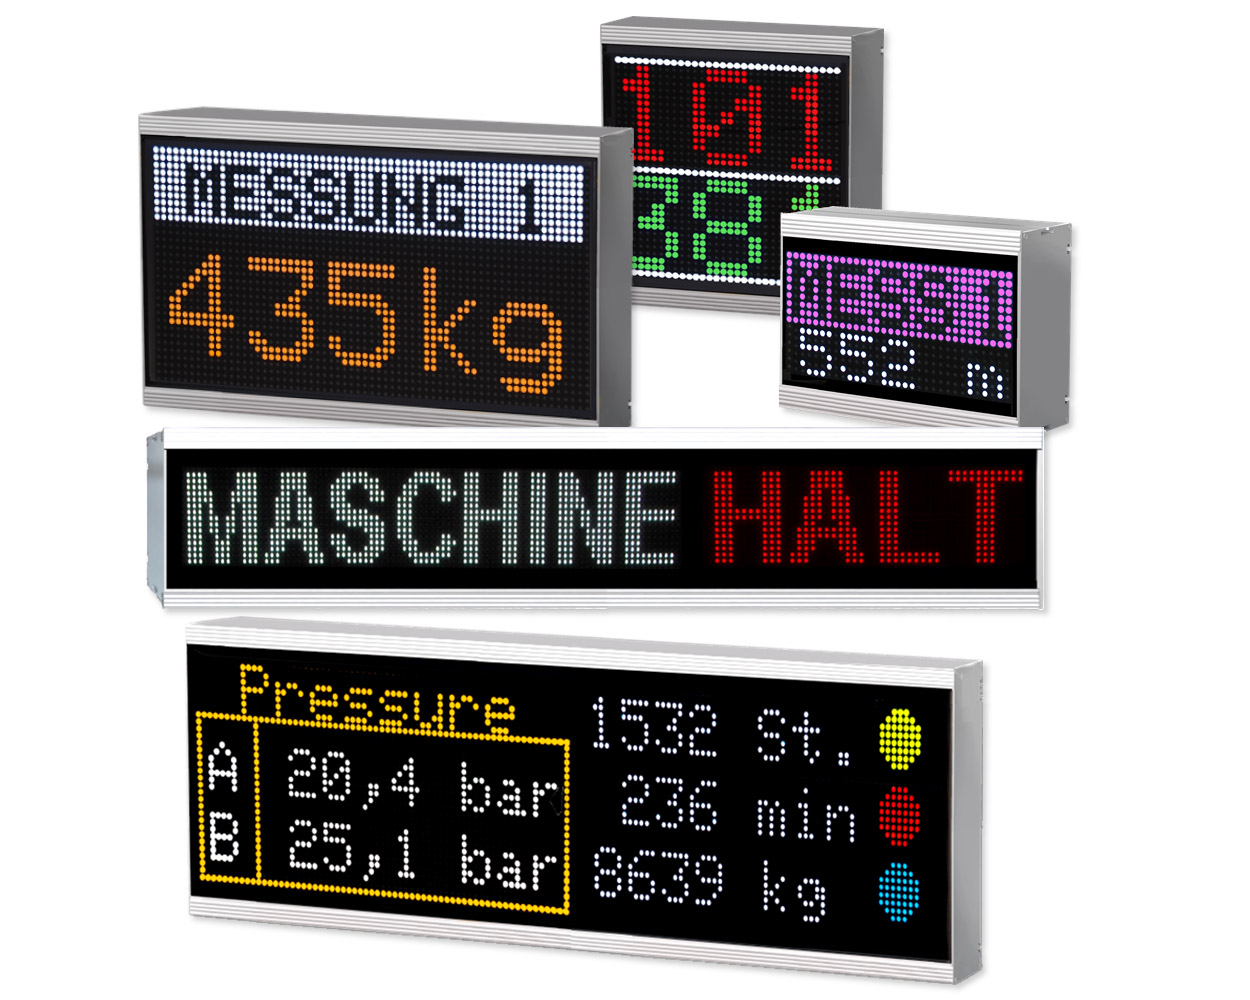 Alphanumeric large displays, 16 colors, indoor/outdoor, modular design, numerous different sizes available